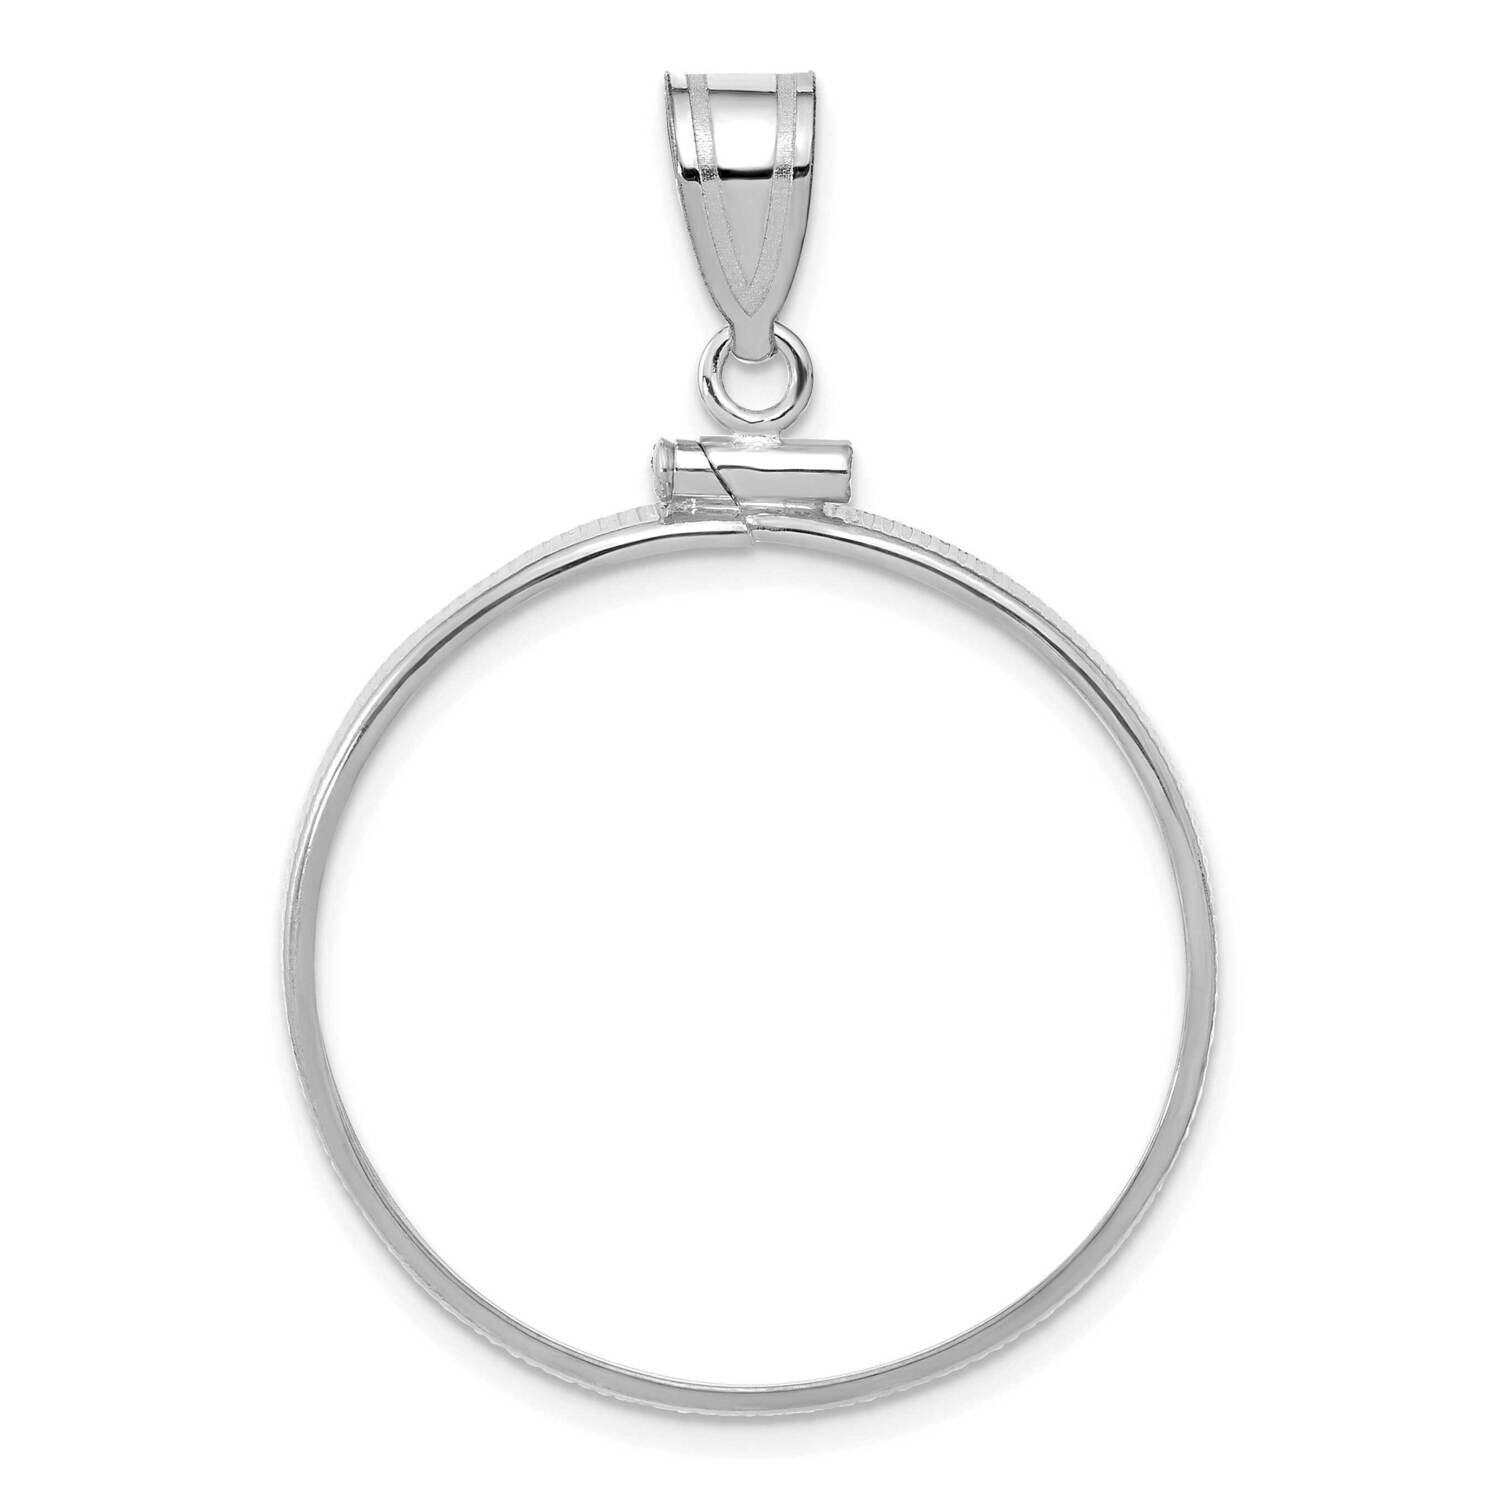 Polished Screw Top 27.0mm X 2.35mm Coin Bezel Pendant 14k White Gold C1885W/27.0